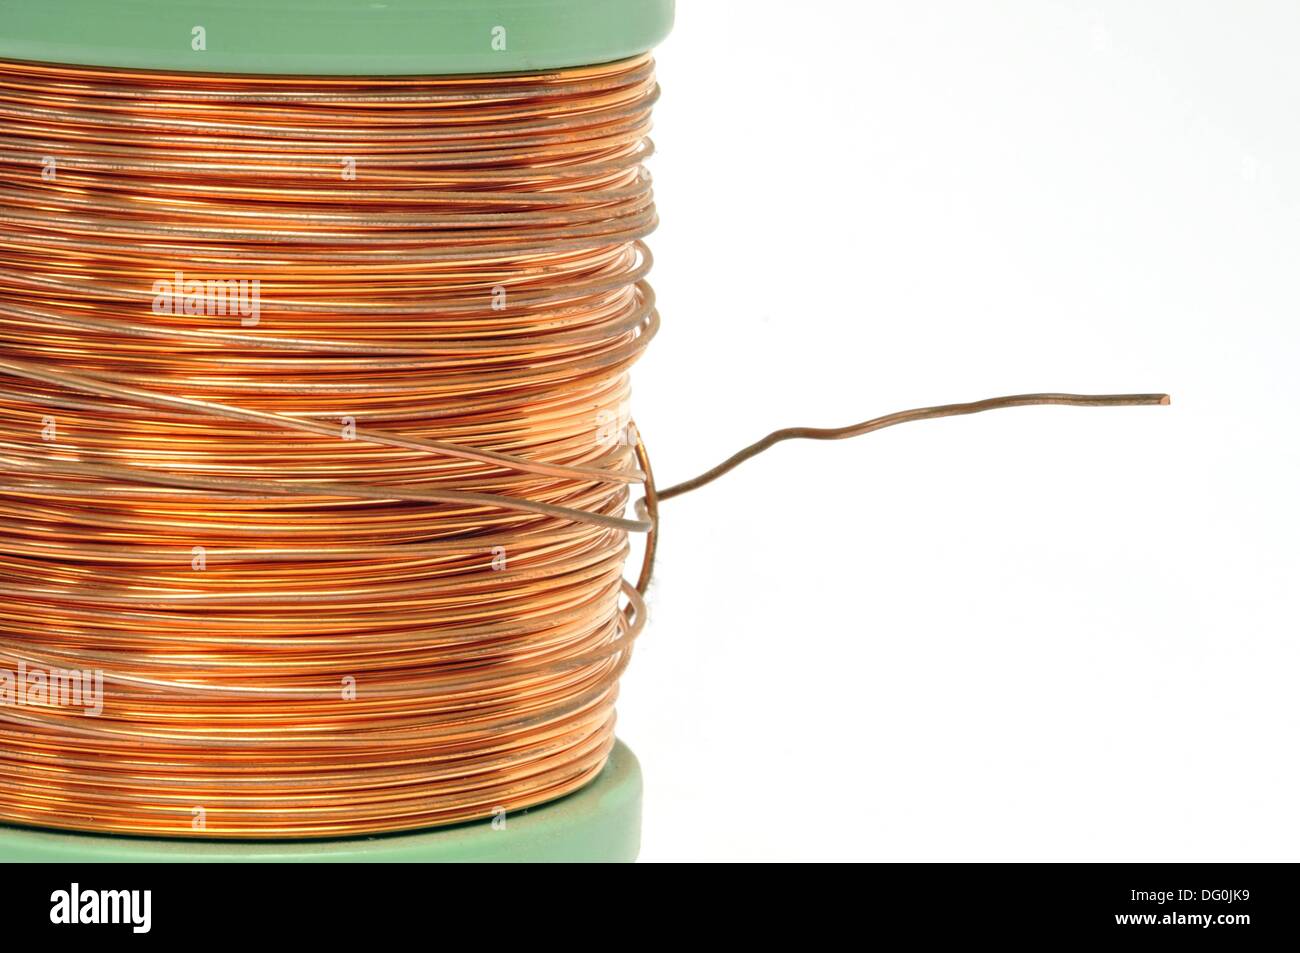 Reel of Copper Wire Stock Photo - Alamy